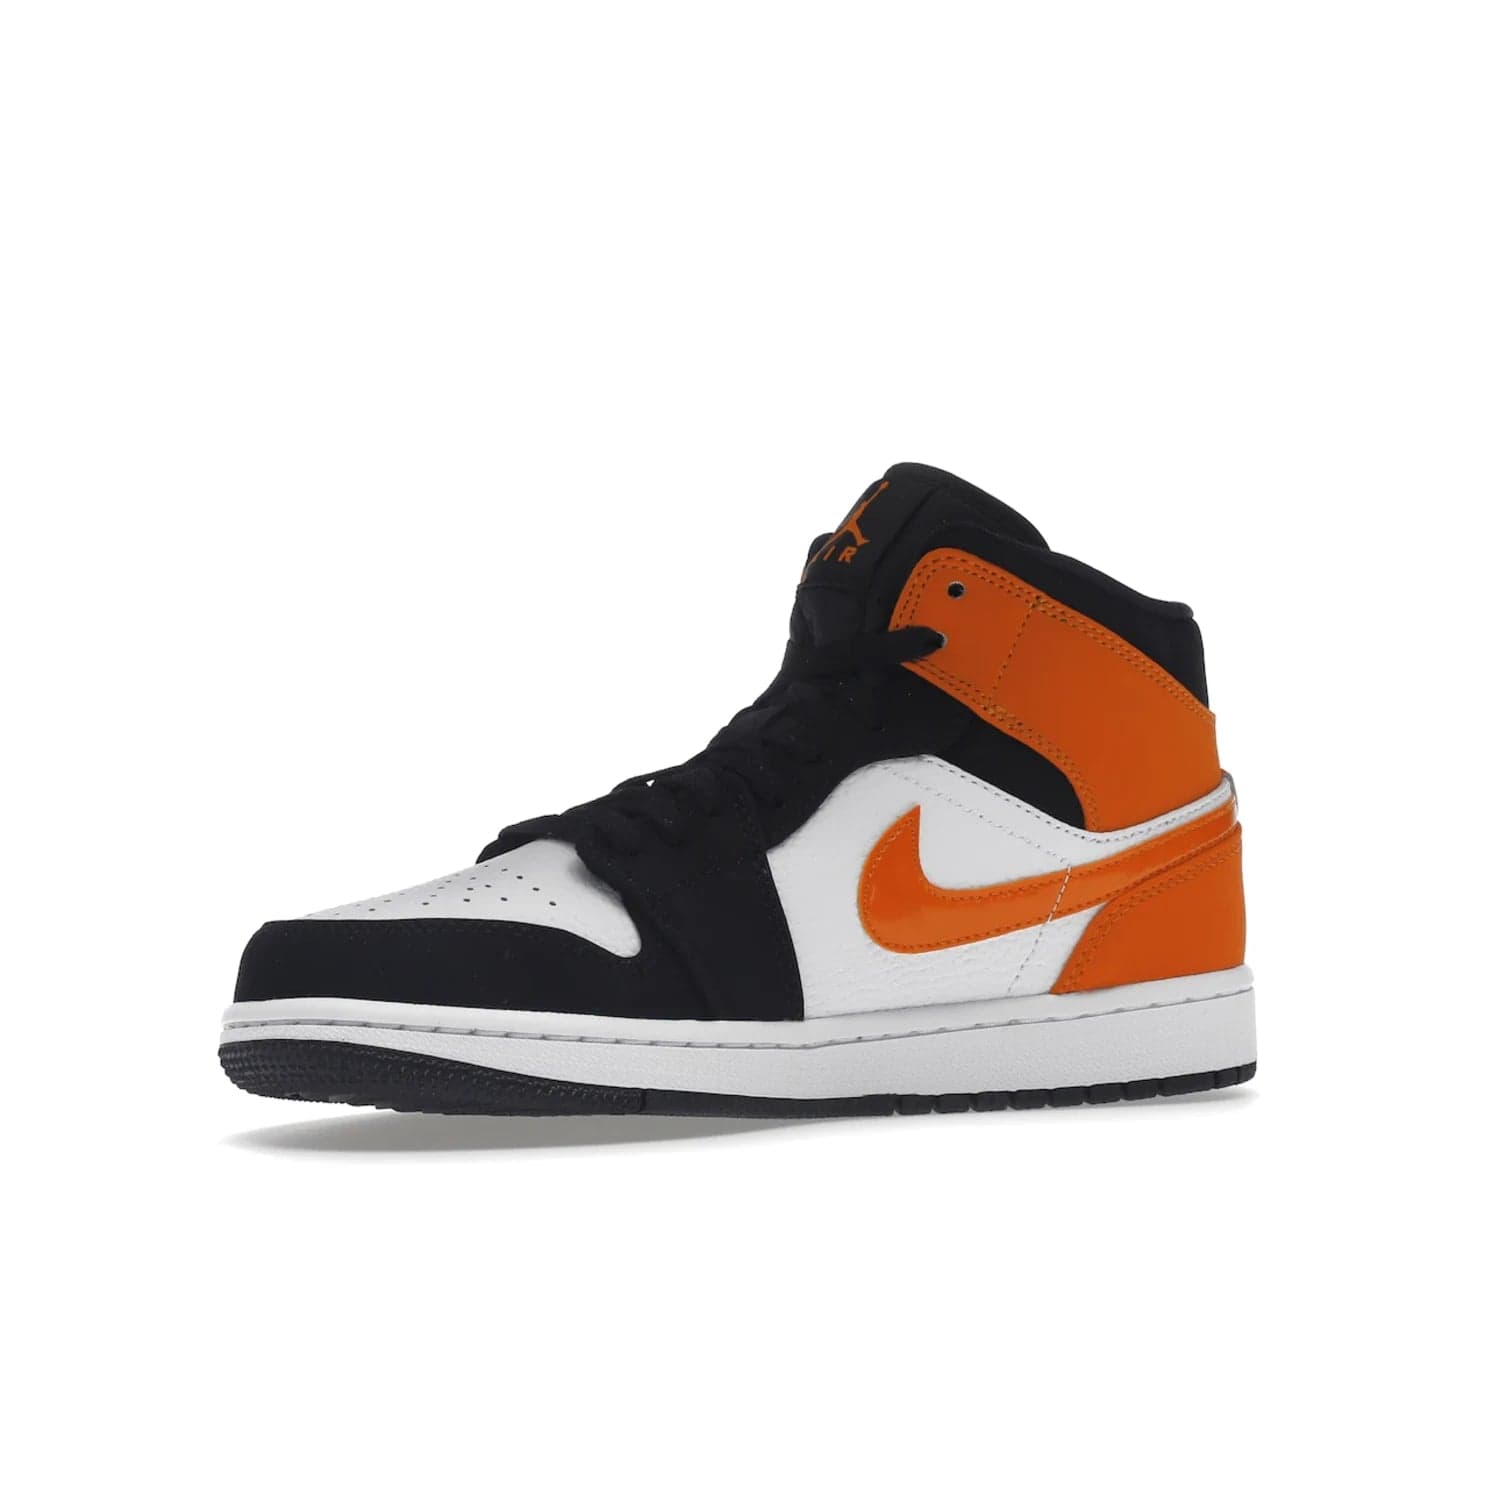 Jordan 1 Mid Shattered Backboard - Image 16 - Only at www.BallersClubKickz.com - The Air Jordan 1 Mid Shattered Backboard offers a timeless Black/White-Starfish colorway. Classic Swoosh logo and AJ insignia plus a shatterd backboard graphic on the insole. Get your pair today!